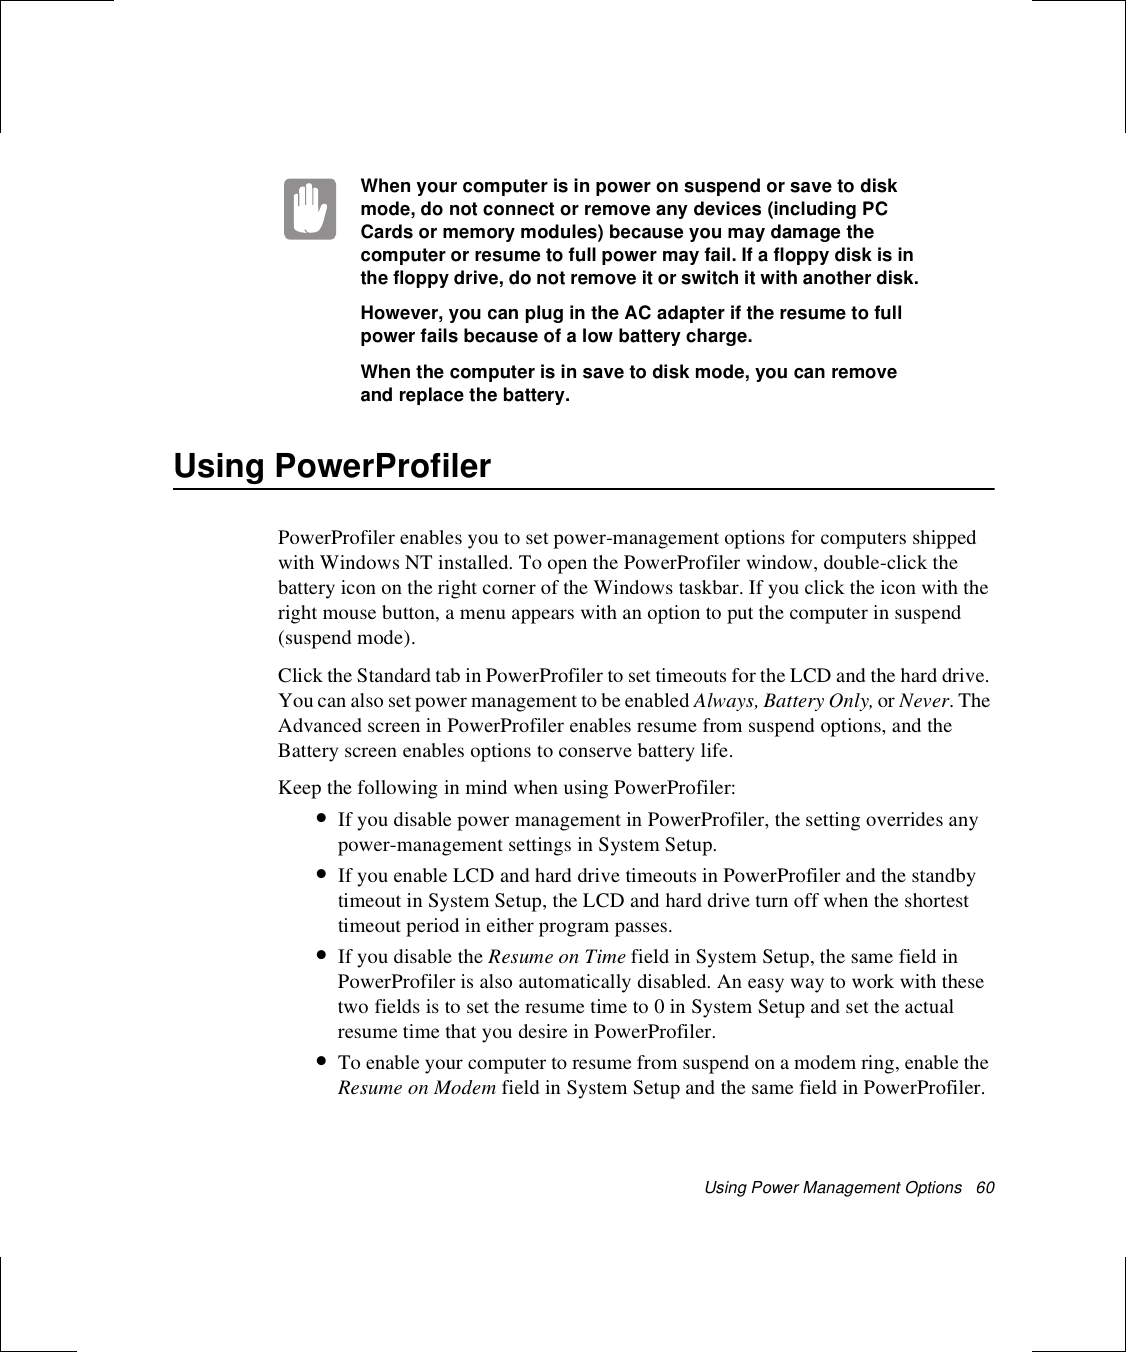 Using Power Management Options   60When your computer is in power on suspend or save to disk mode, do not connect or remove any devices (including PC Cards or memory modules) because you may damage the computer or resume to full power may fail. If a floppy disk is in the floppy drive, do not remove it or switch it with another disk.However, you can plug in the AC adapter if the resume to full power fails because of a low battery charge.When the computer is in save to disk mode, you can remove and replace the battery.Using PowerProfilerPowerProfiler enables you to set power-management options for computers shipped with Windows NT installed. To open the PowerProfiler window, double-click the battery icon on the right corner of the Windows taskbar. If you click the icon with the right mouse button, a menu appears with an option to put the computer in suspend (suspend mode).Click the Standard tab in PowerProfiler to set timeouts for the LCD and the hard drive. You can also set power management to be enabled Always, Battery Only, or Never. The Advanced screen in PowerProfiler enables resume from suspend options, and the Battery screen enables options to conserve battery life.Keep the following in mind when using PowerProfiler:•If you disable power management in PowerProfiler, the setting overrides any power-management settings in System Setup. •If you enable LCD and hard drive timeouts in PowerProfiler and the standby timeout in System Setup, the LCD and hard drive turn off when the shortest timeout period in either program passes.•If you disable the Resume on Time field in System Setup, the same field in PowerProfiler is also automatically disabled. An easy way to work with these two fields is to set the resume time to 0 in System Setup and set the actual resume time that you desire in PowerProfiler.•To enable your computer to resume from suspend on a modem ring, enable the Resume on Modem field in System Setup and the same field in PowerProfiler.